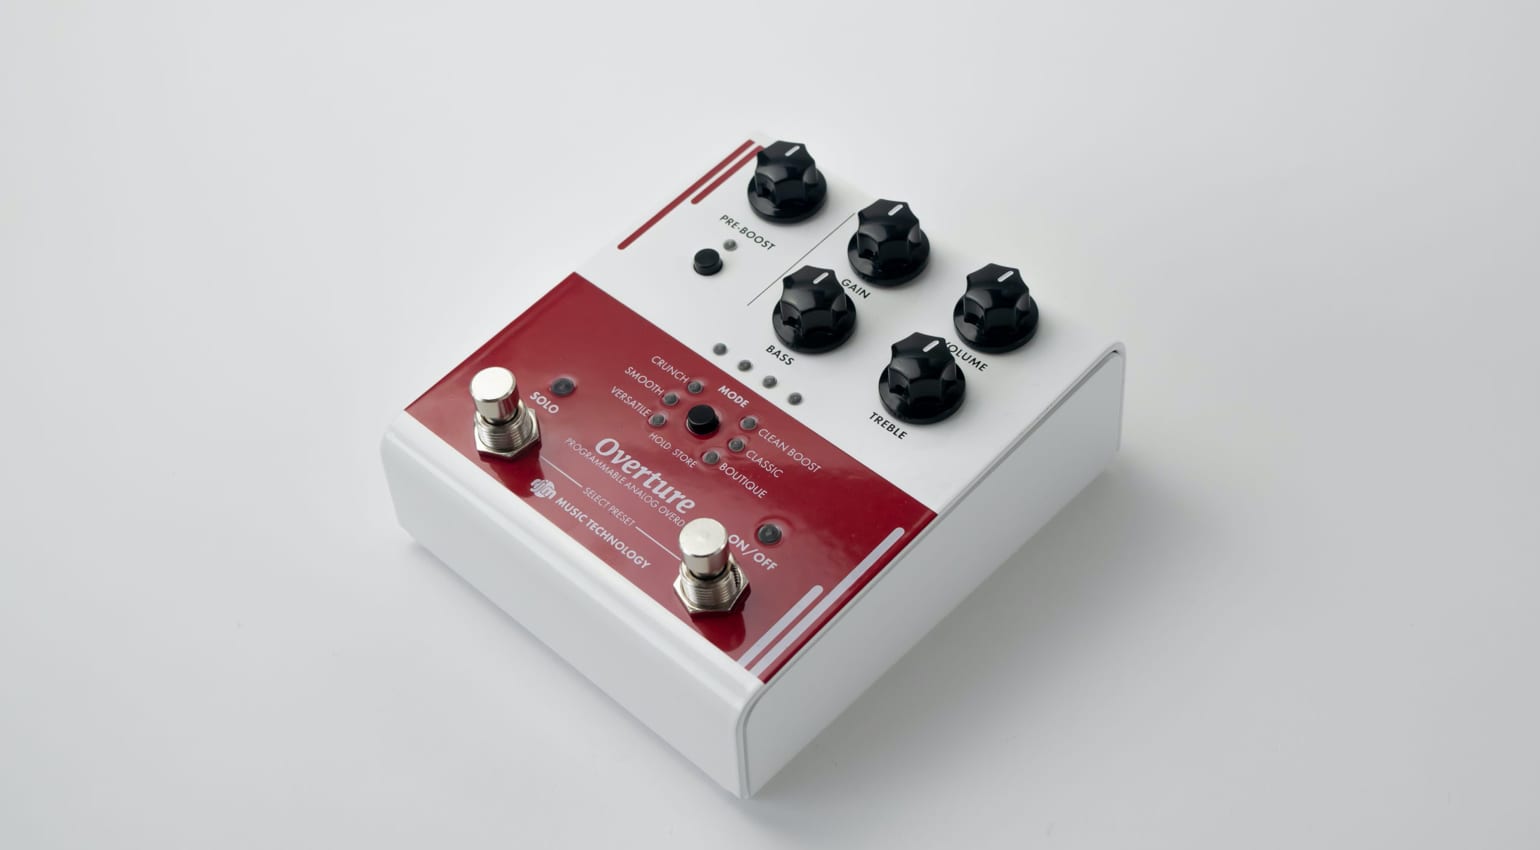 RJM Music presents Overture, a 6-in-1 programmable analogue 